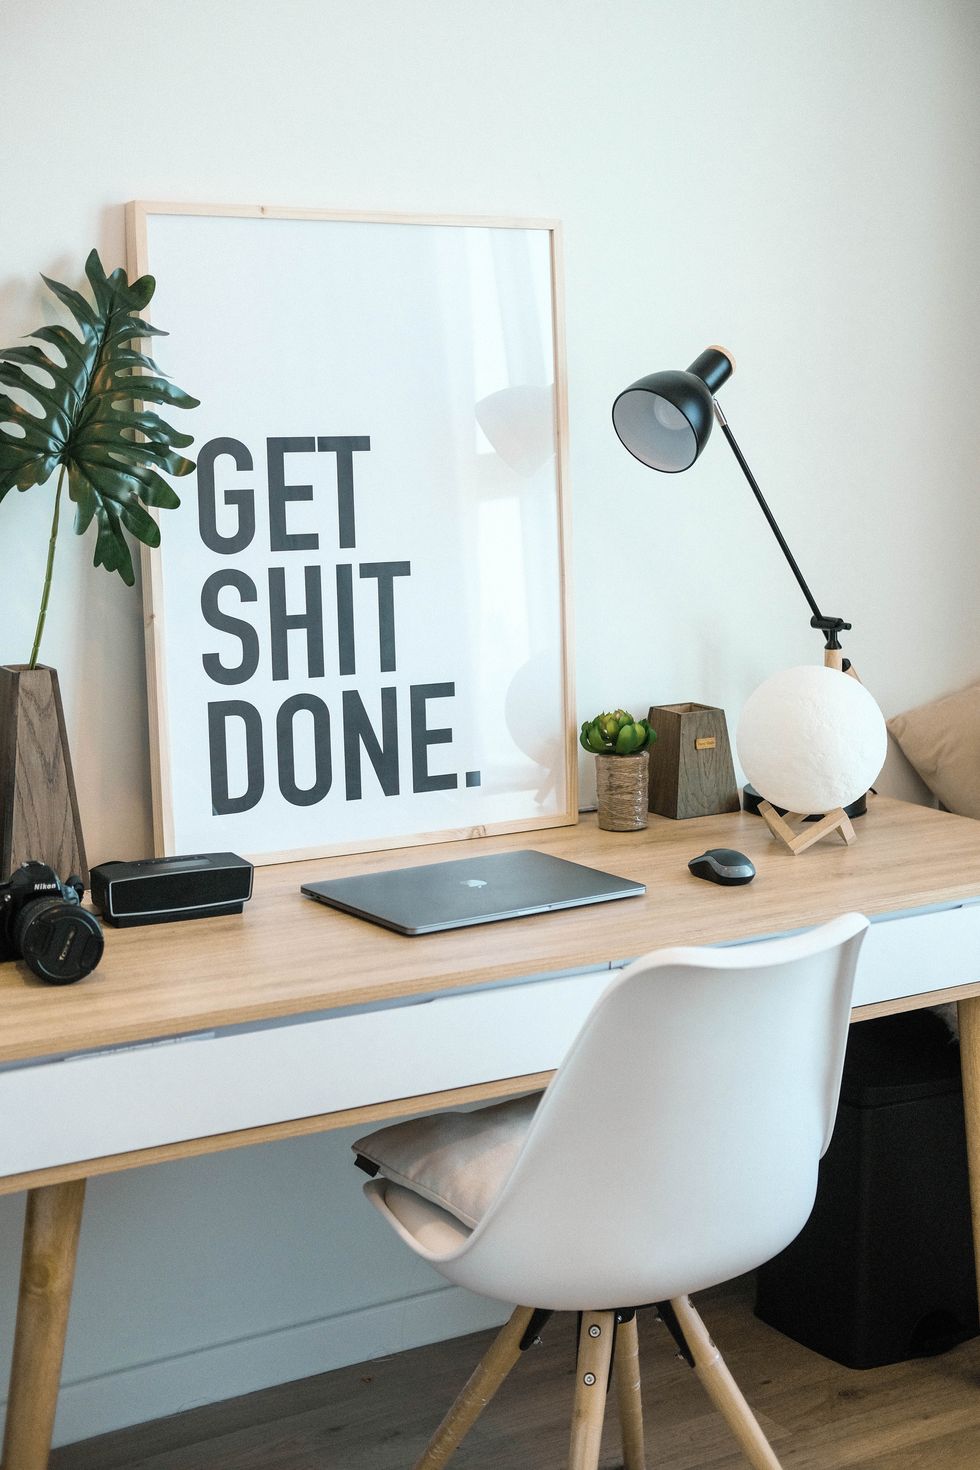 How To Work Less And Get More Done